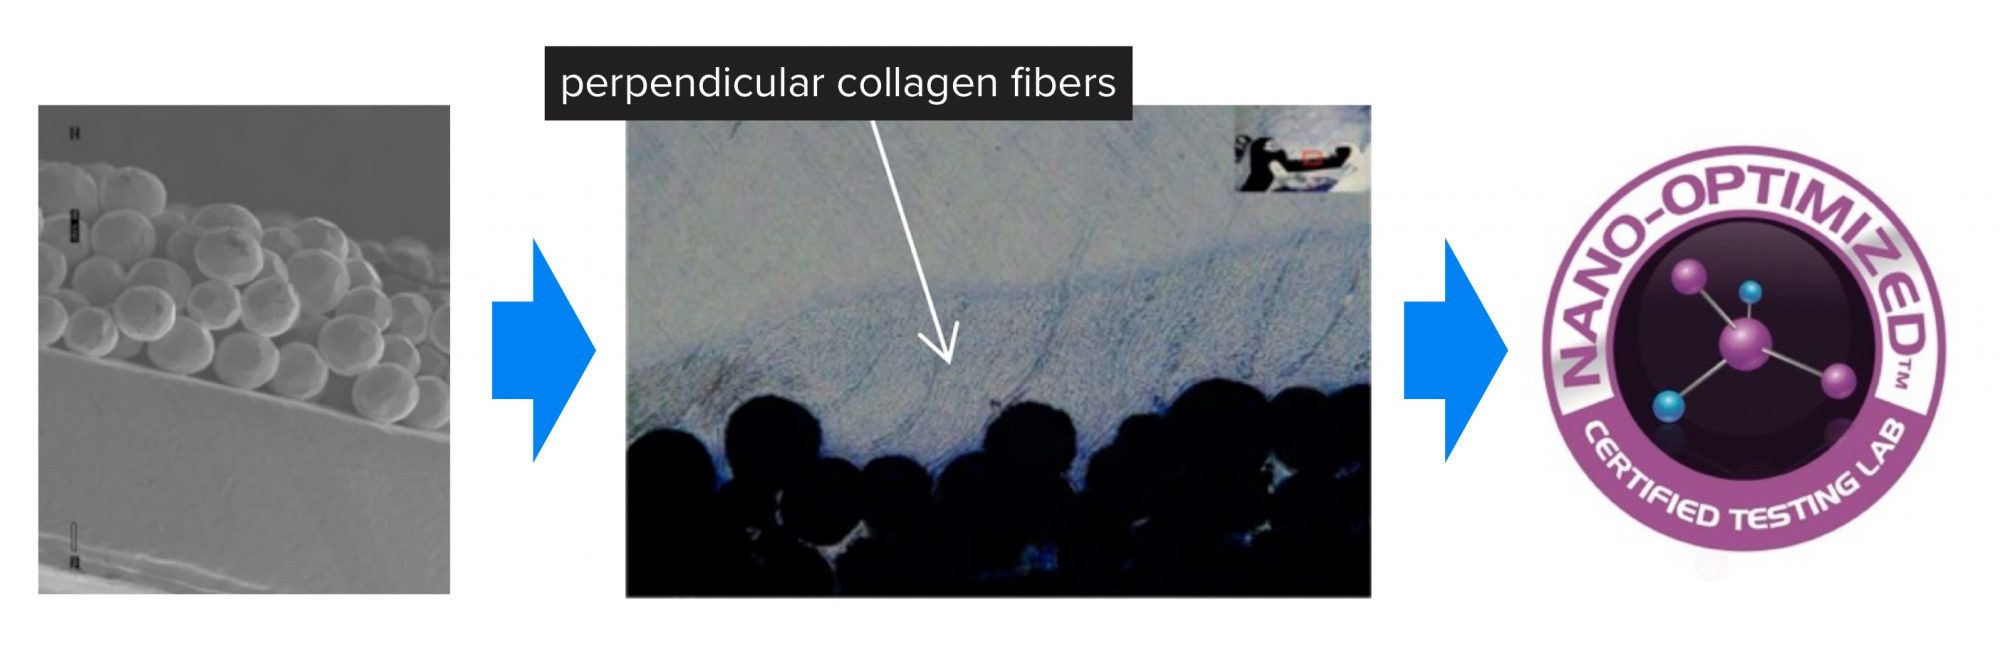 Figure 3: Prof. Webster and his team have coined the term “Nano-OptimizedTM” which uses AI to predict how well a patient’s immune system will accept or reject a medical device suggesting an optimal nanotopography to achieve its goal. In this specific example, nanotextures were placed on materials used for tendon fixation regrowing tendons off of their surface to improve implant function